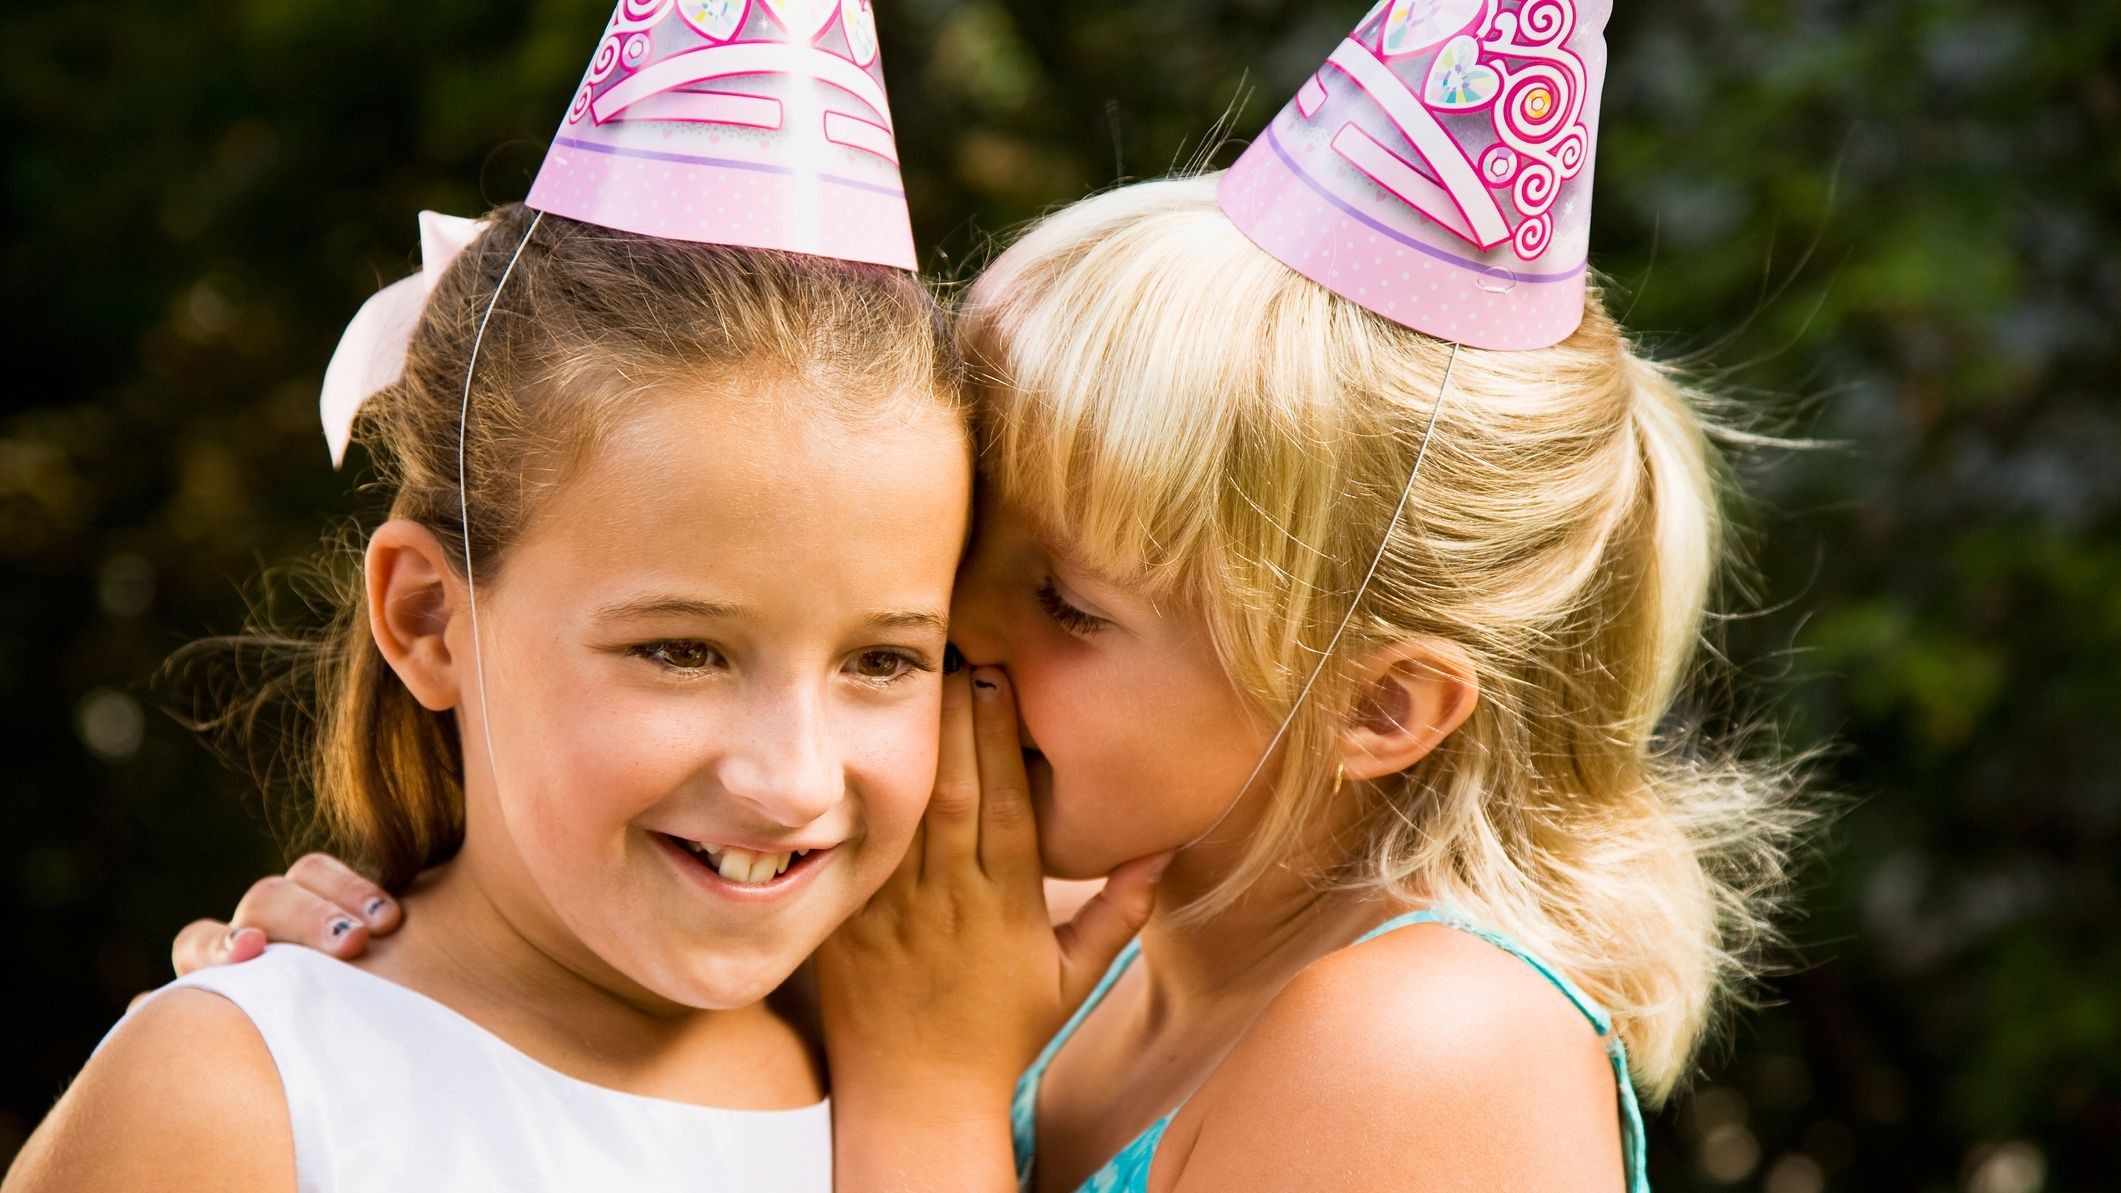 cute birthday messages for kids